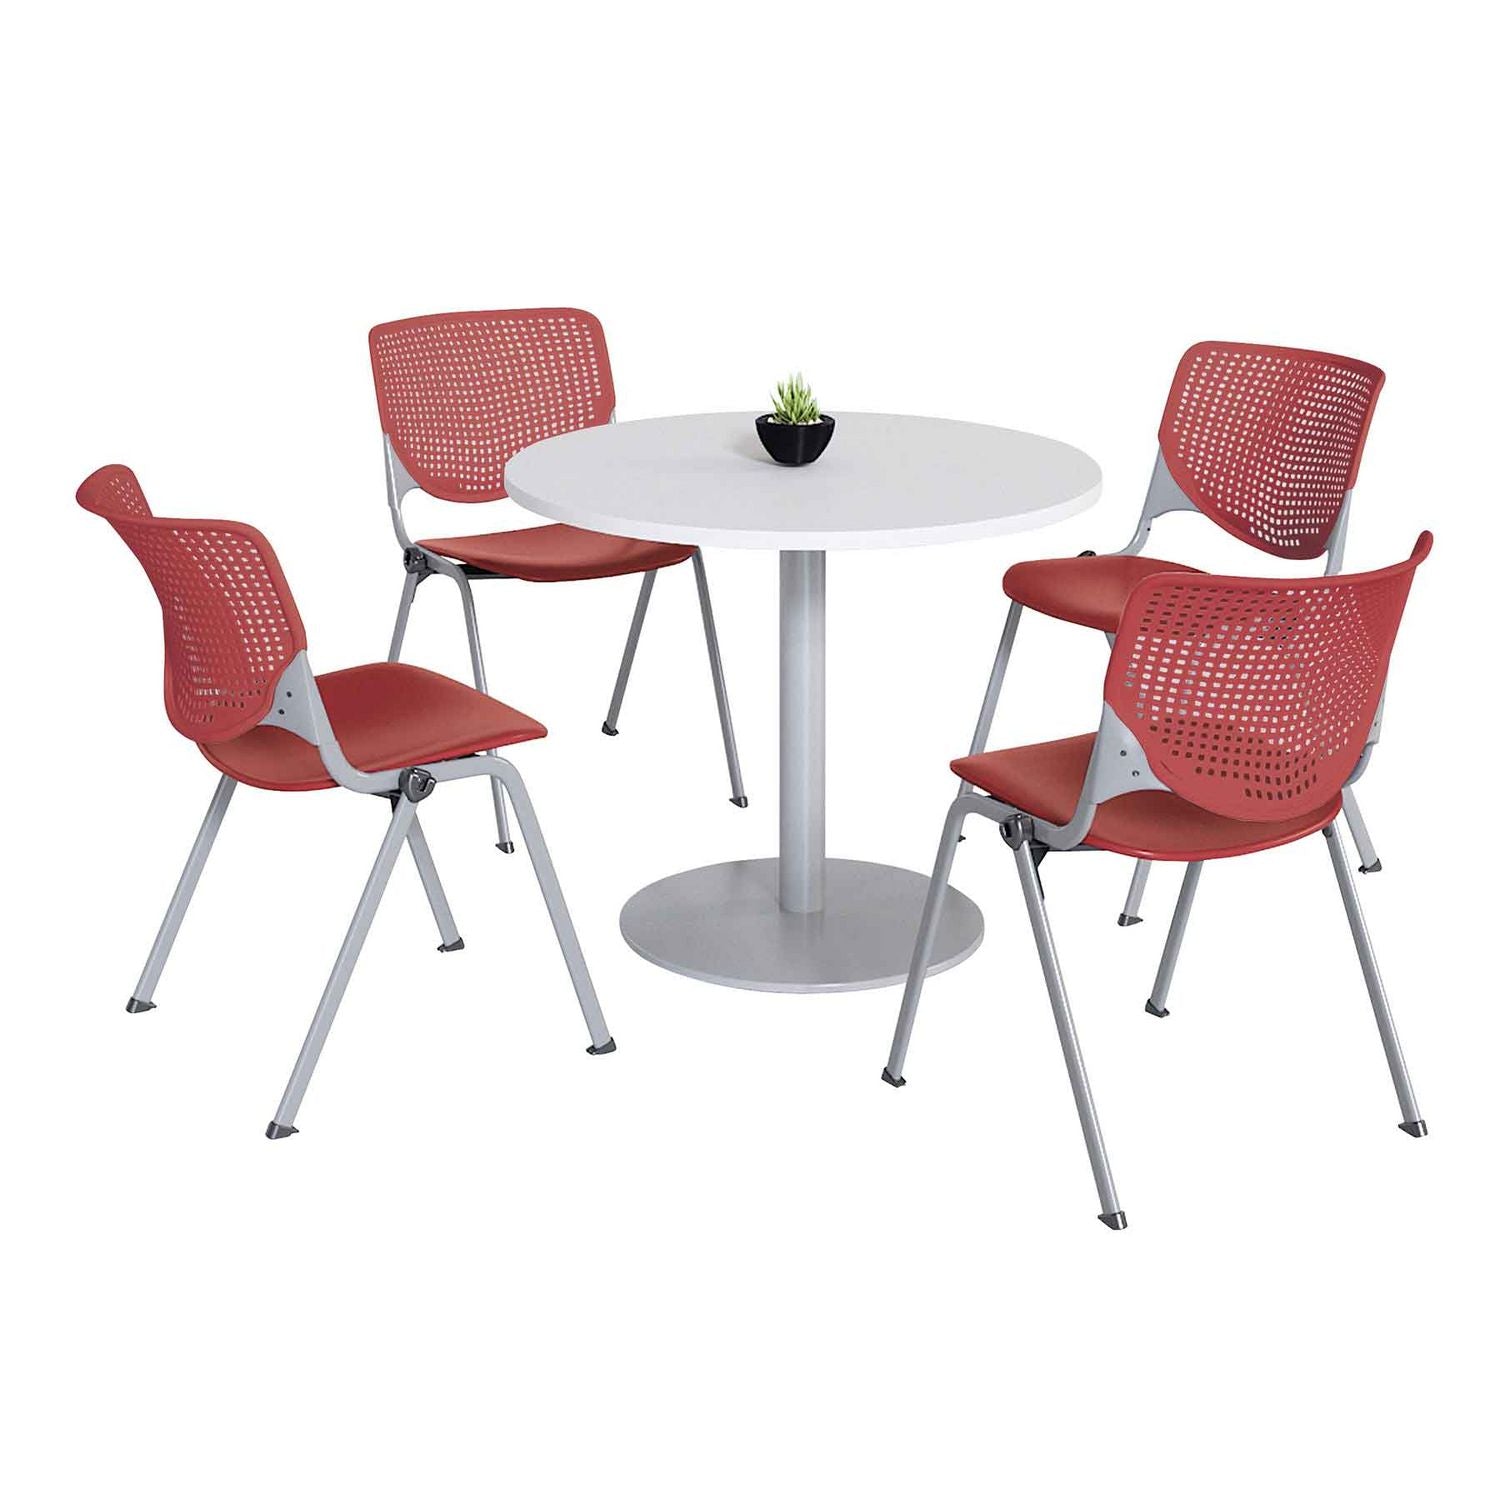 pedestal-table-with-four-coral-kool-series-chairs-round-36-dia-x-29h-designer-white-ships-in-4-6-business-days_kfi811774036764 - 1